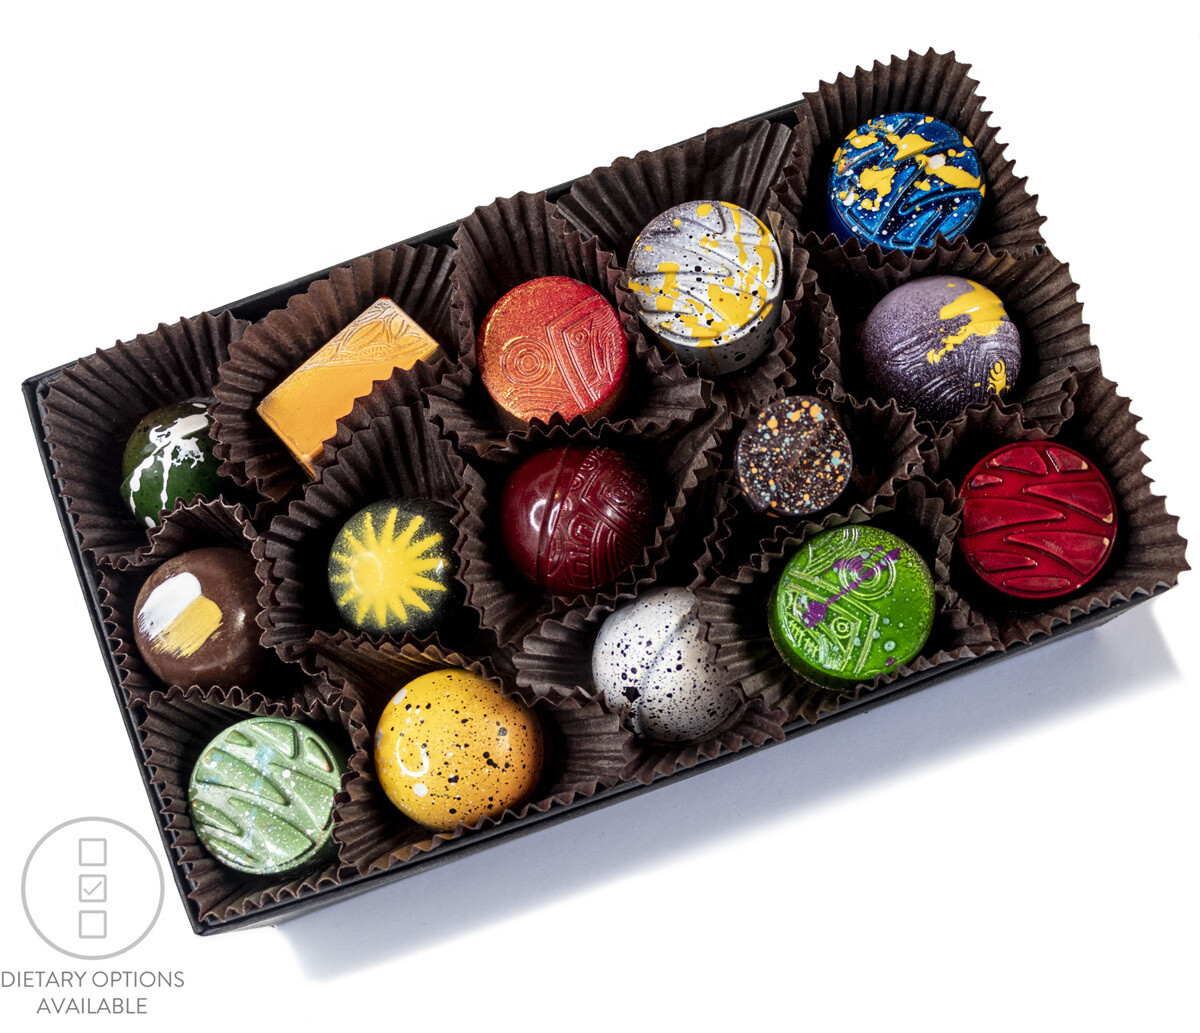 15-Piece Box of Assorted Confections